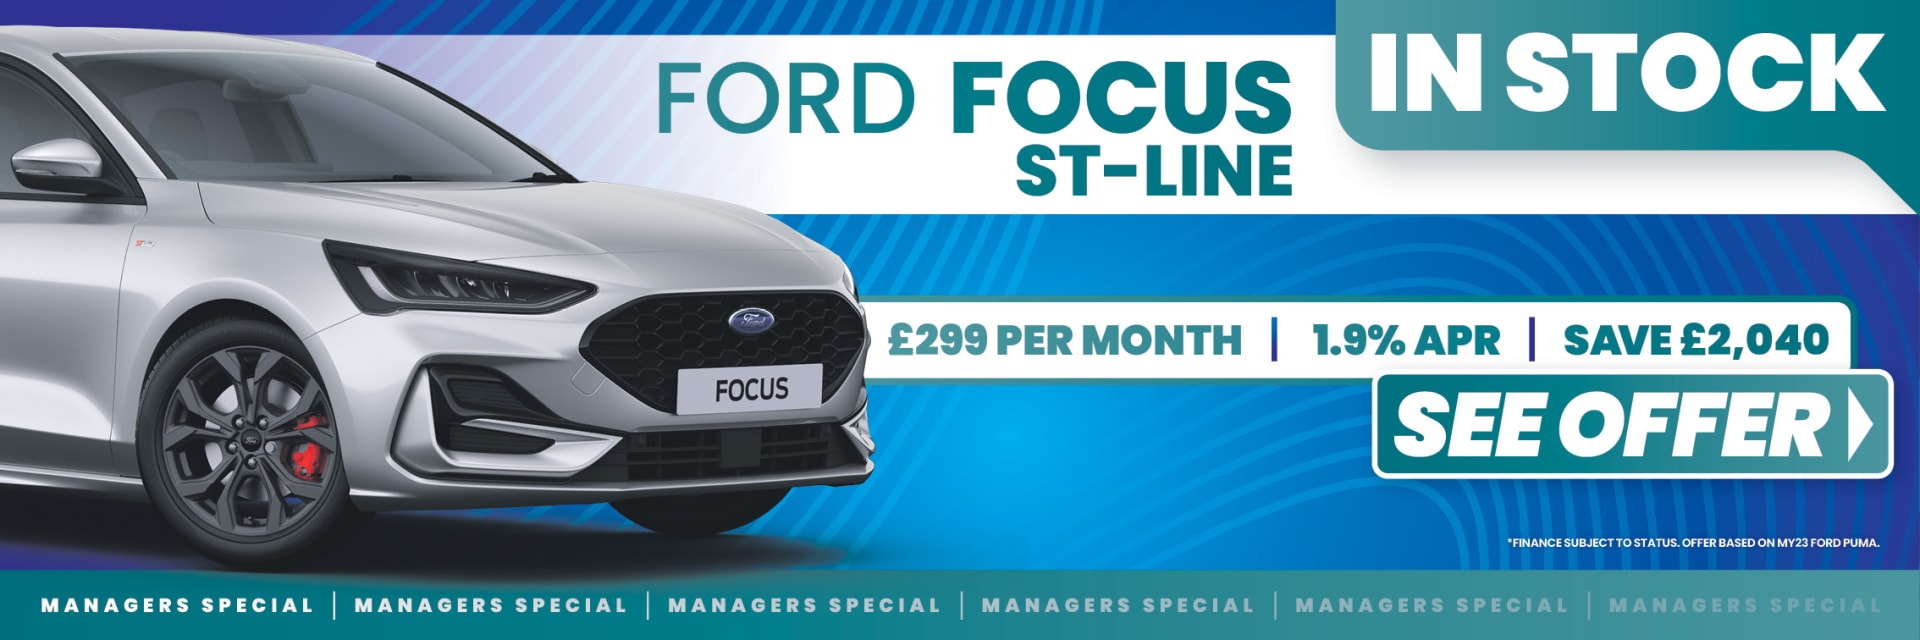 Ford Focus Managers Special